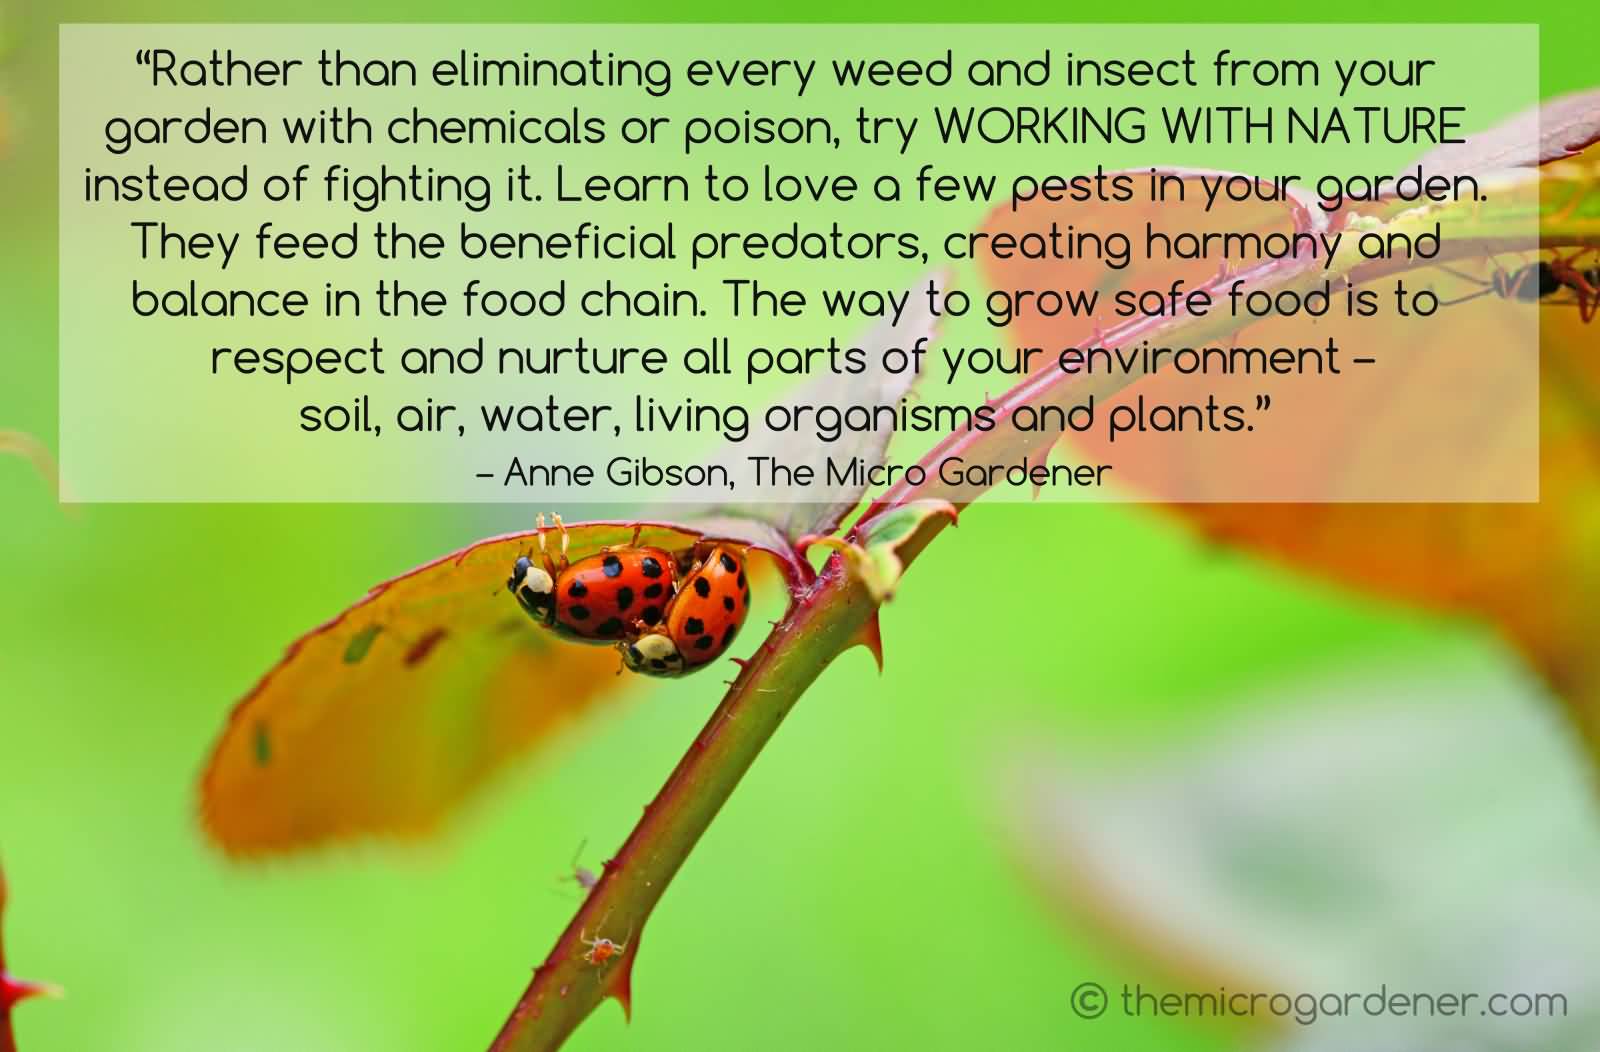 Rather than eliminating every weed and insect from your garden with chemicals or poison, try working with nature instead of fighting it.... - Anne Gibson, The Micro Gardener